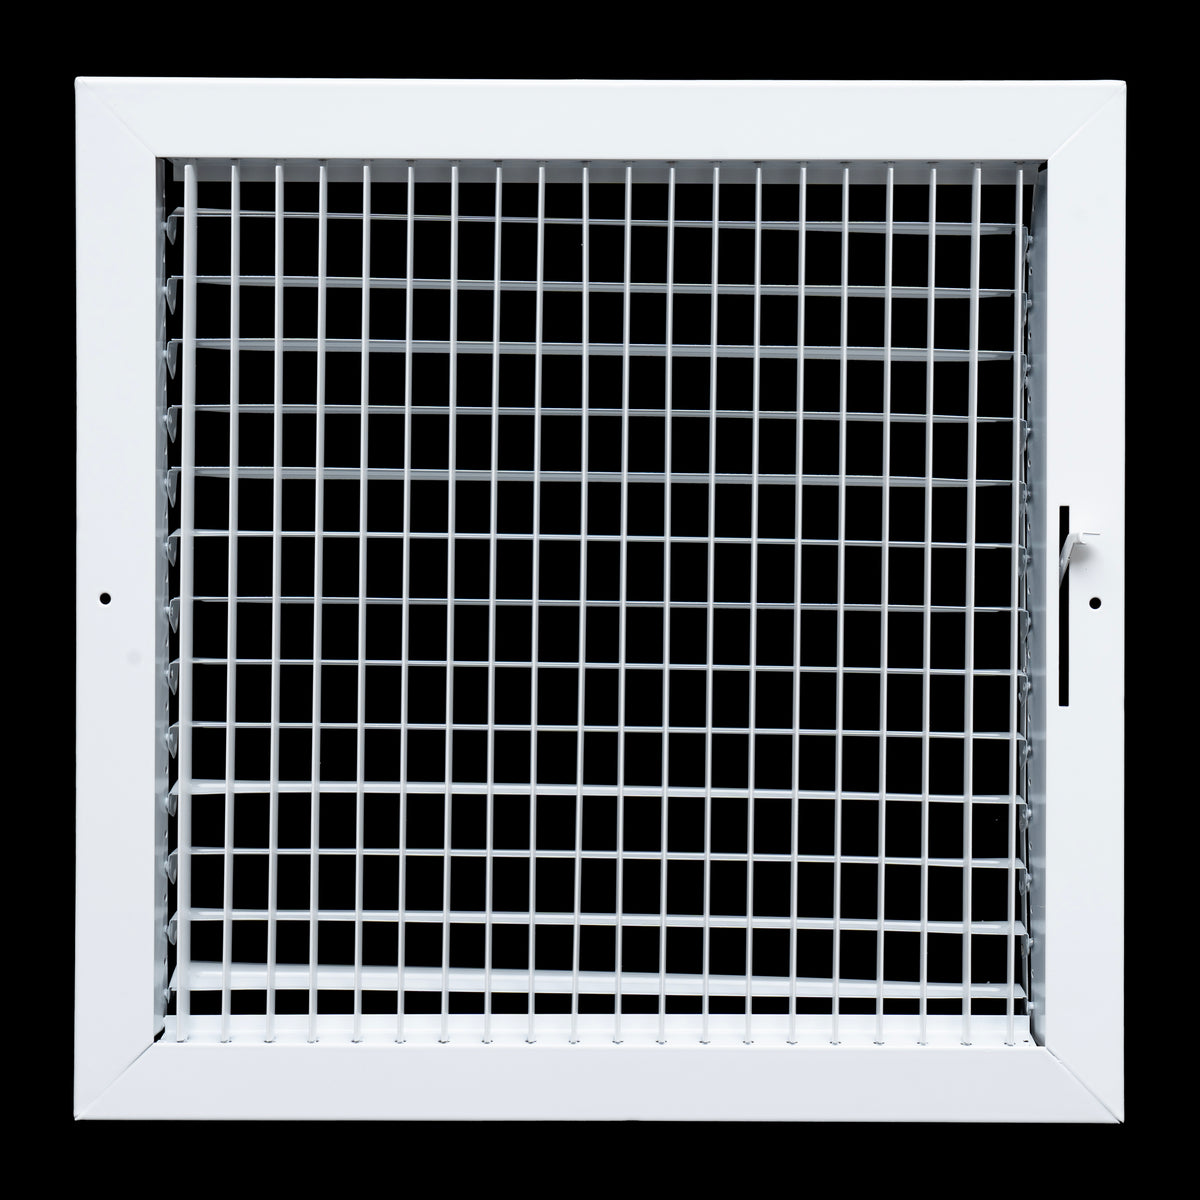 airgrilles 14"w x 14"h steel adjustable air supply grille  -  register vent cover grill for sidewall and ceiling  -  white  -  outer dimensions: 15.75"w x 15.75"h for 14x14 duct opening hnd-adj-wh-14x14-v1